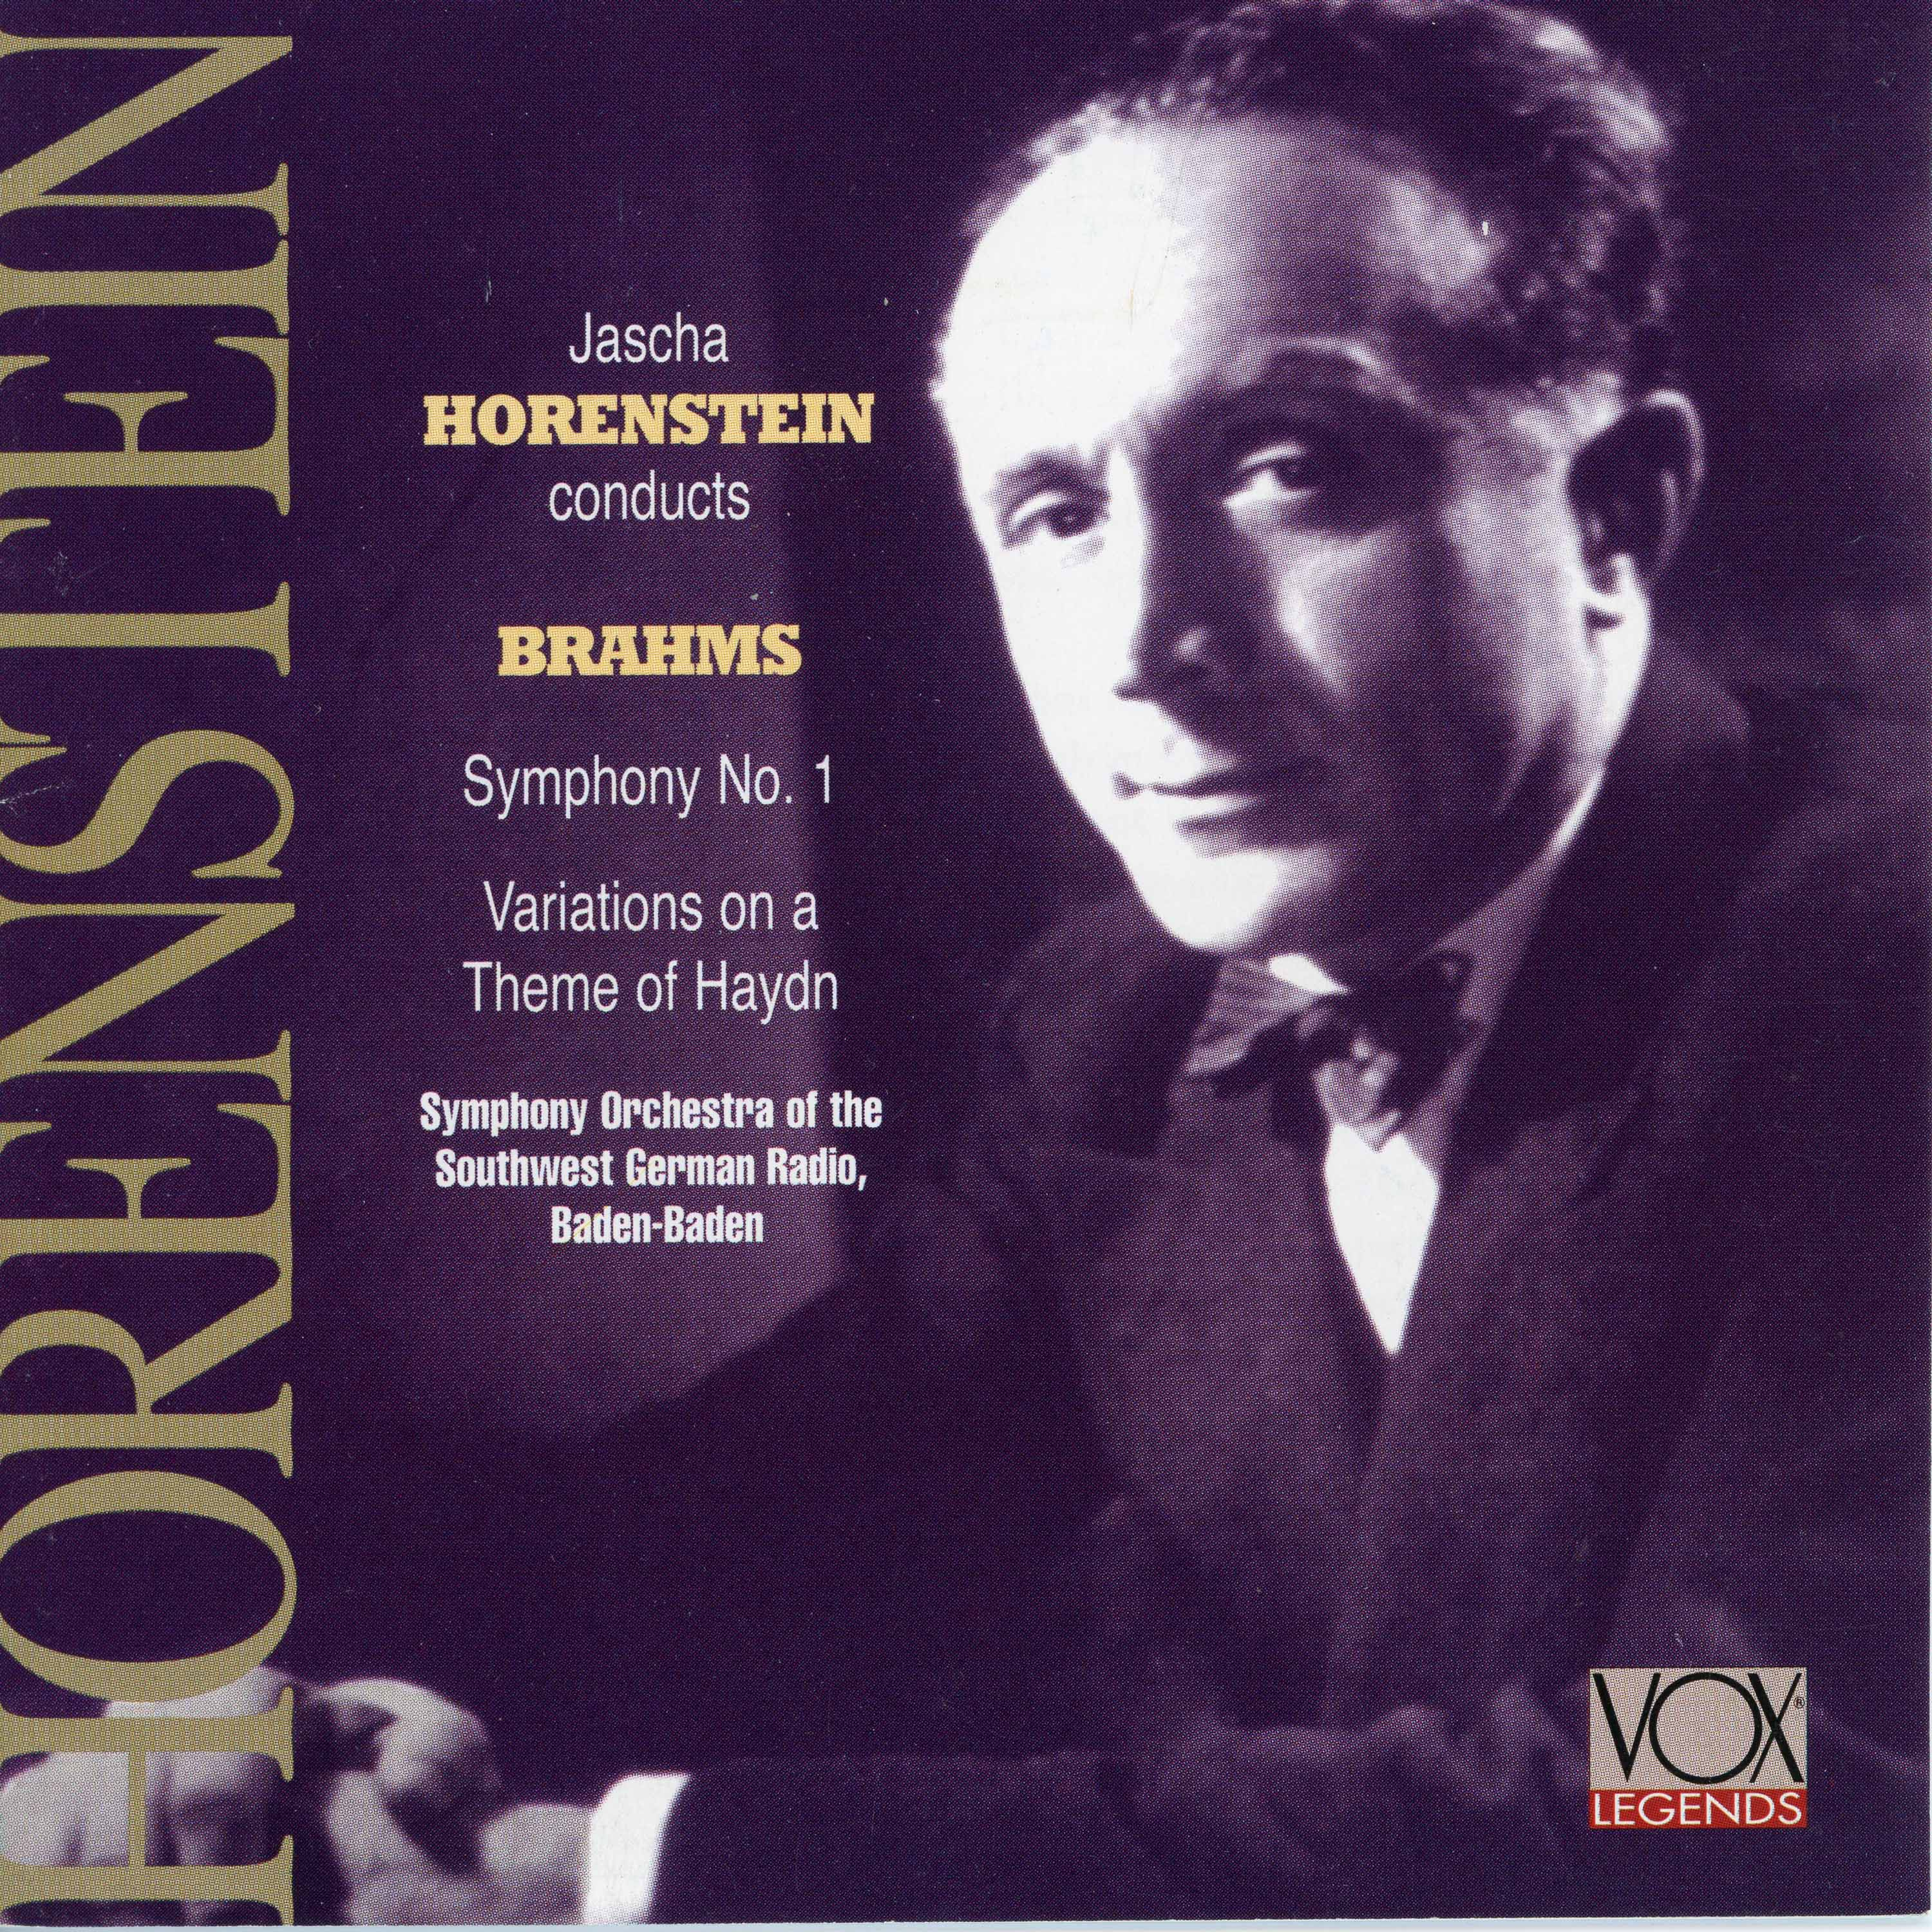 Variations on a Theme by Haydn, Op. 56a "St. Anthony Variations":Variations on a Theme by Haydn, Op. 56a "St. Anthony Variations": Var. 5, Vivace